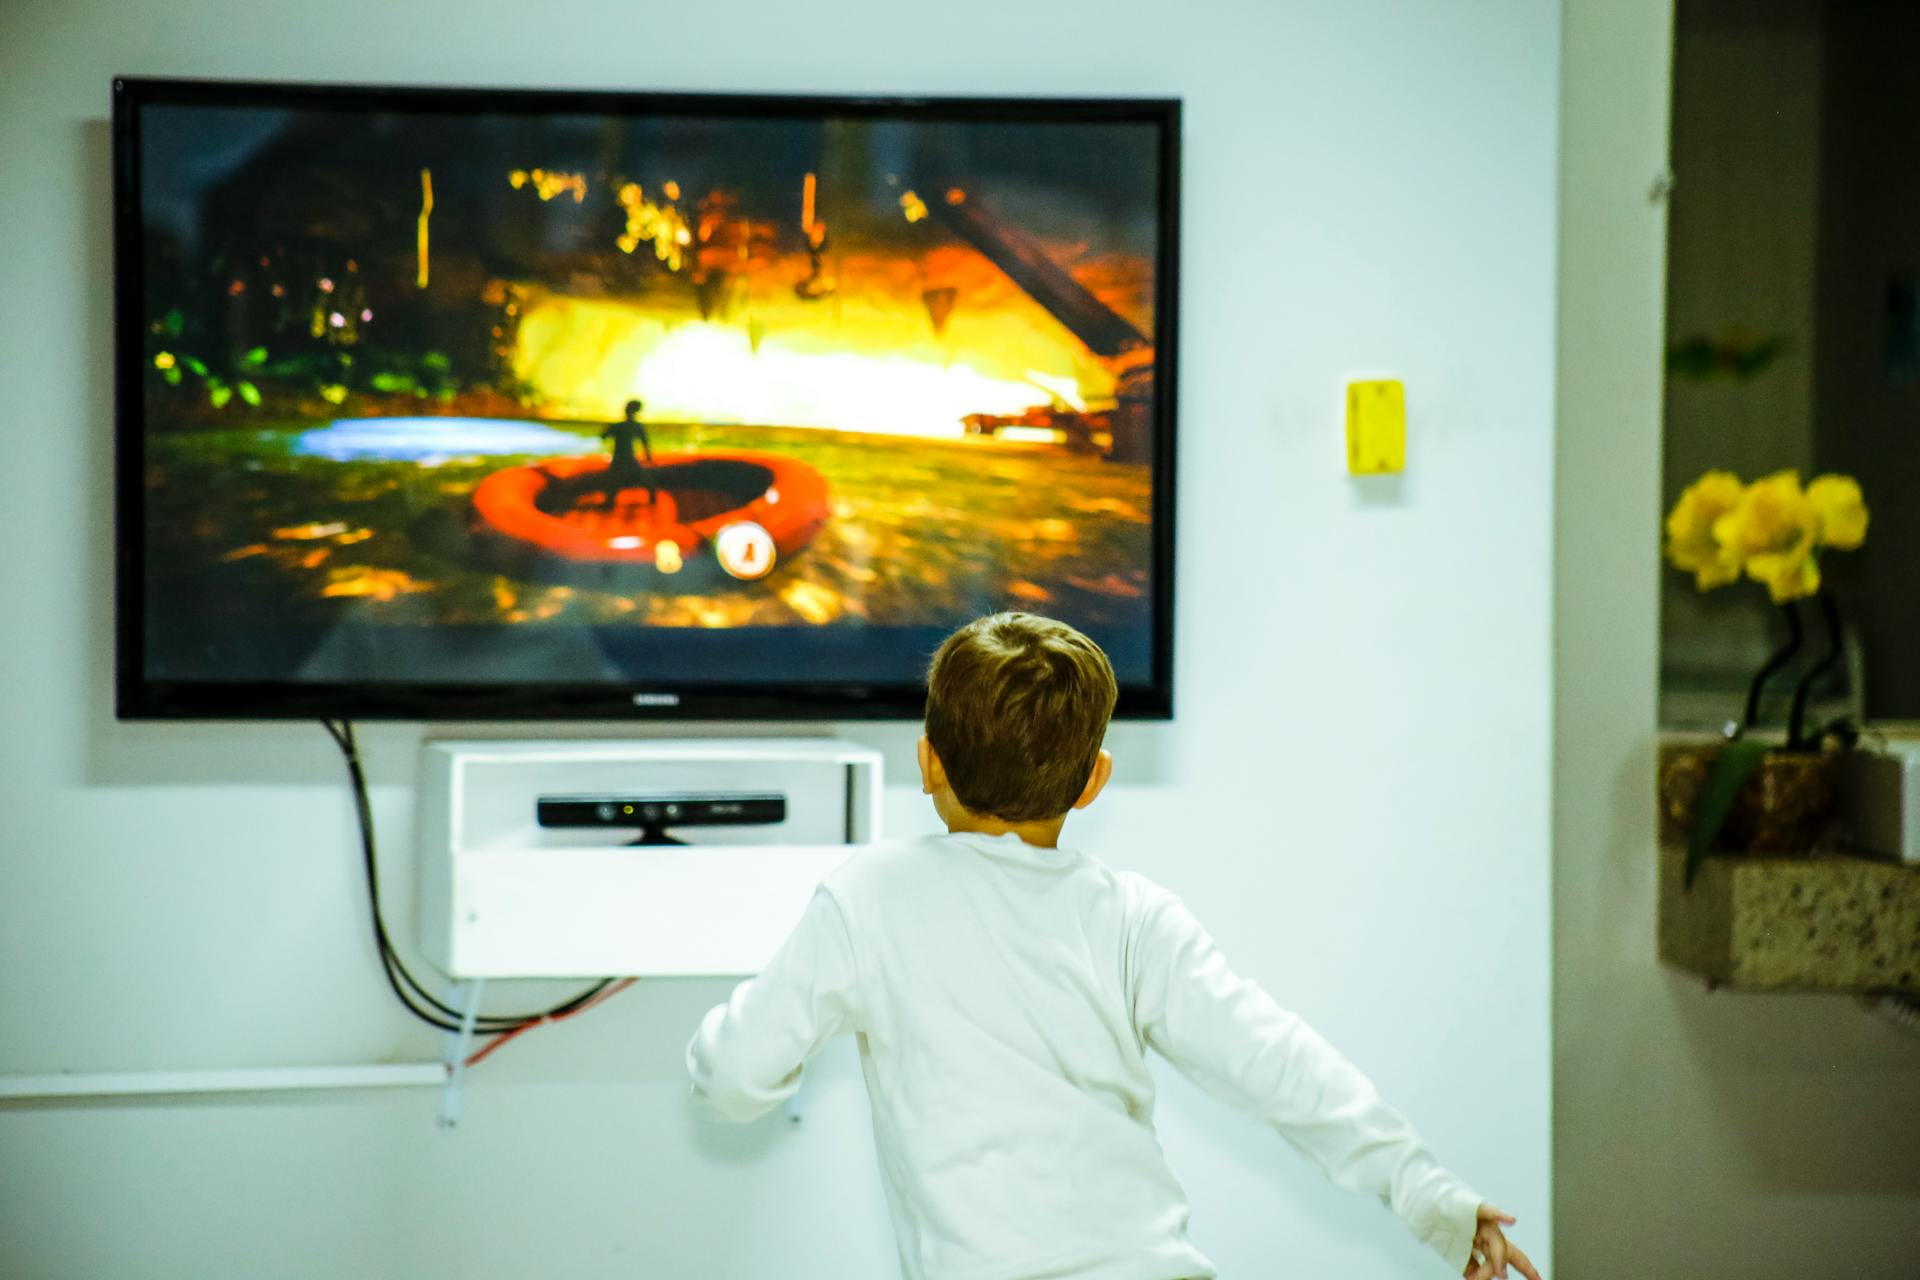 A boy standing in front of a TV | Source: Pexels